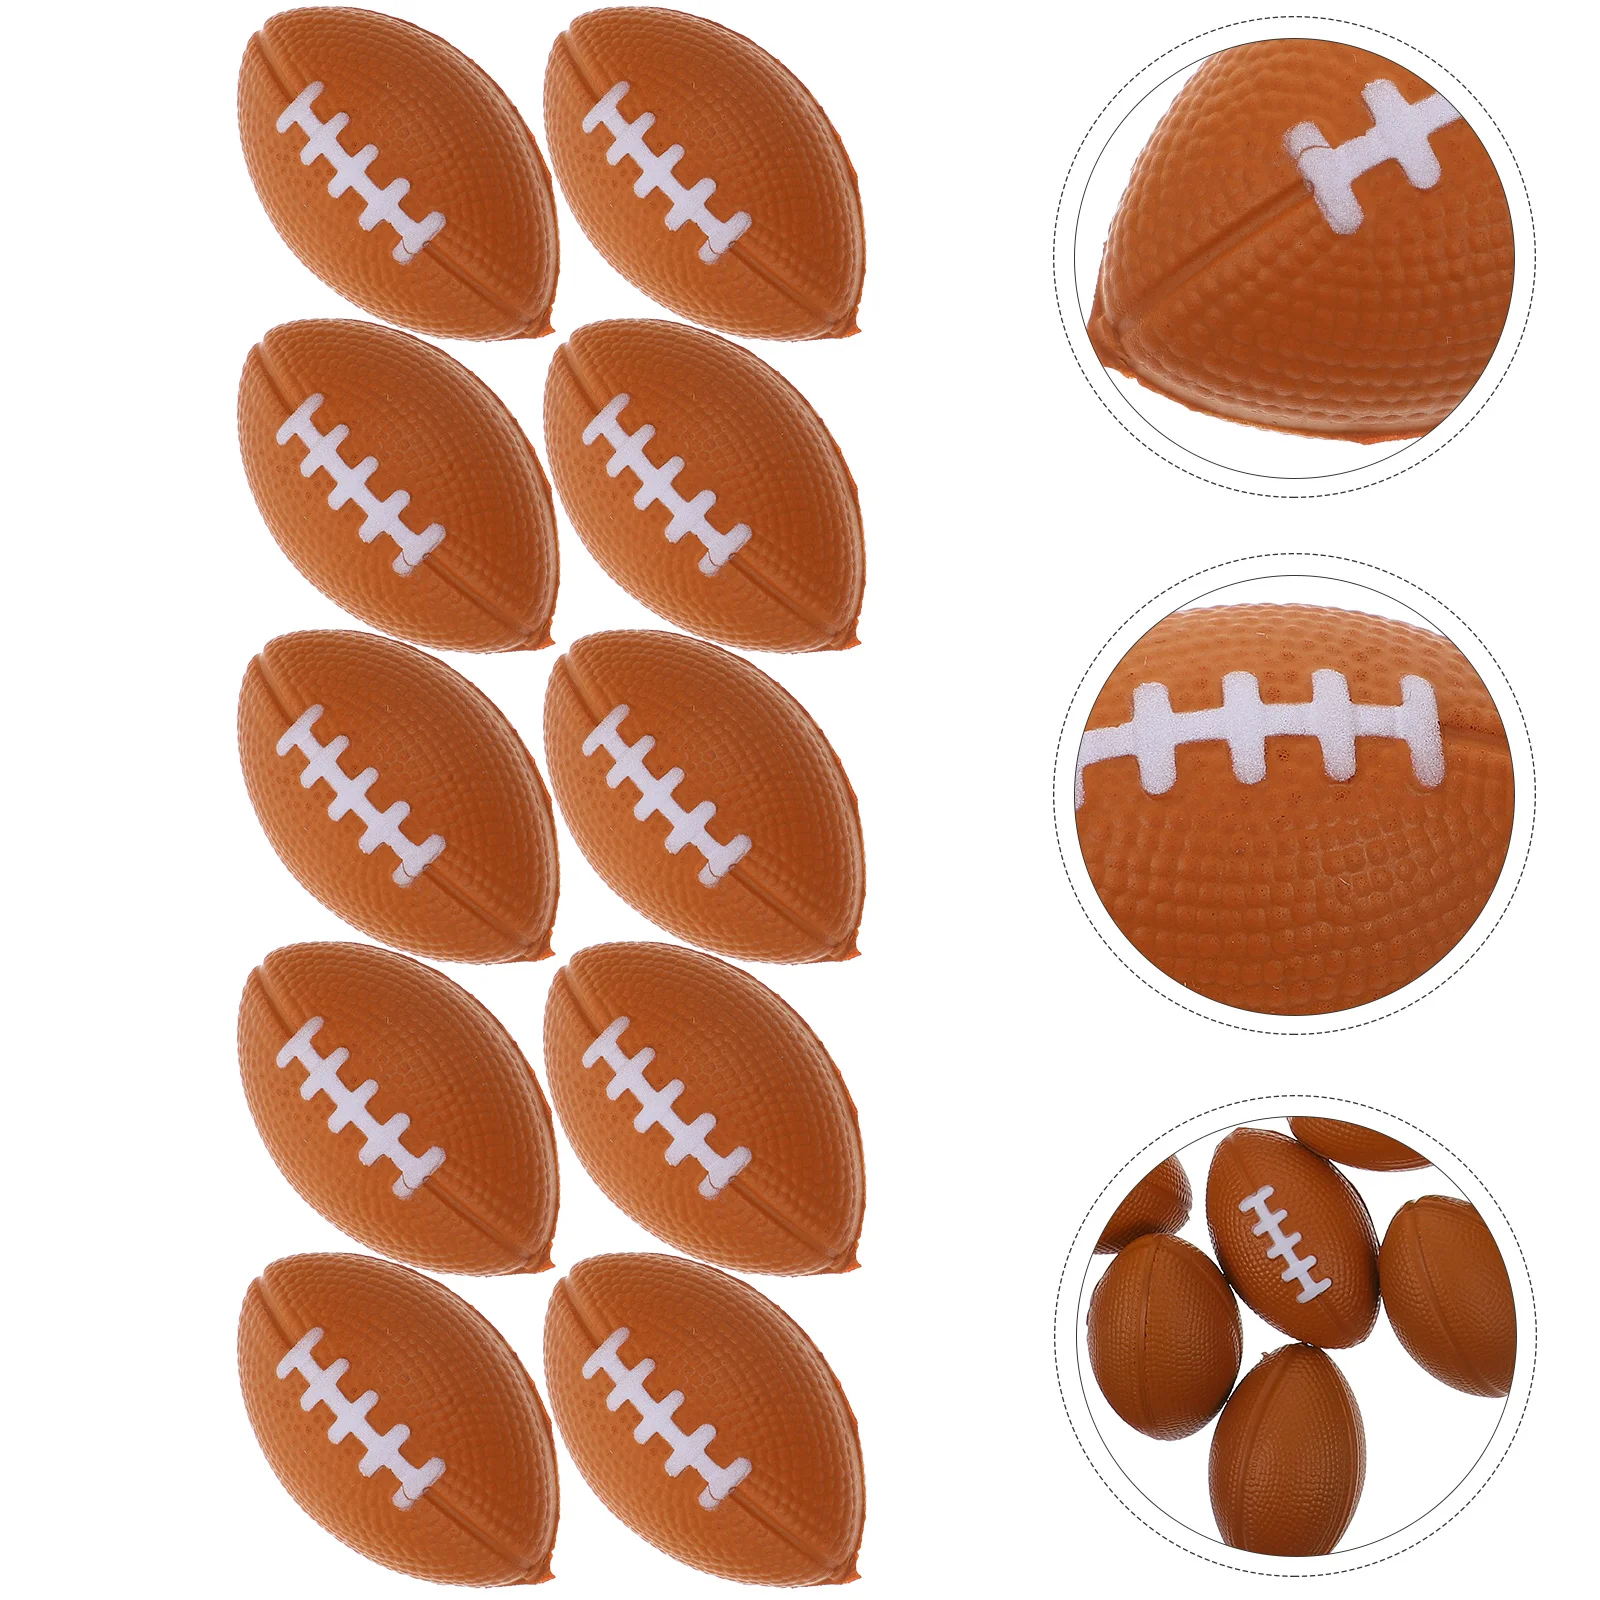 

40 Pcs Stretchy Toy Anxiety Adults Sports Toys Small Footballs Bulk Kid Fidget Plaything Stress Reliever Squeeze Mini Foams